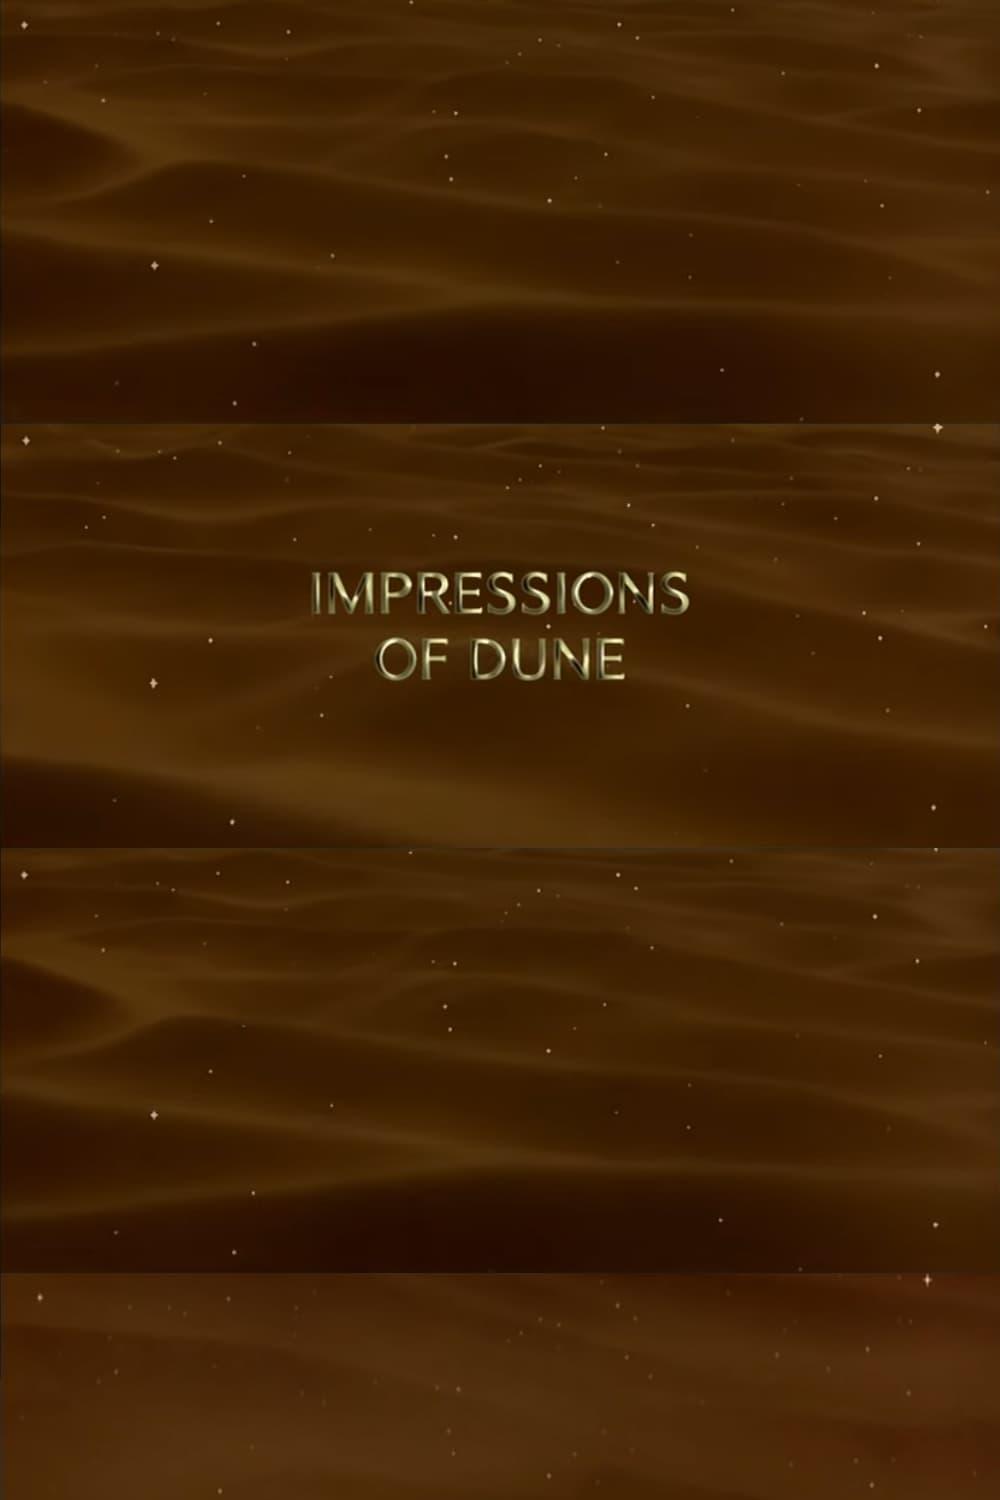 Impressions of Dune poster